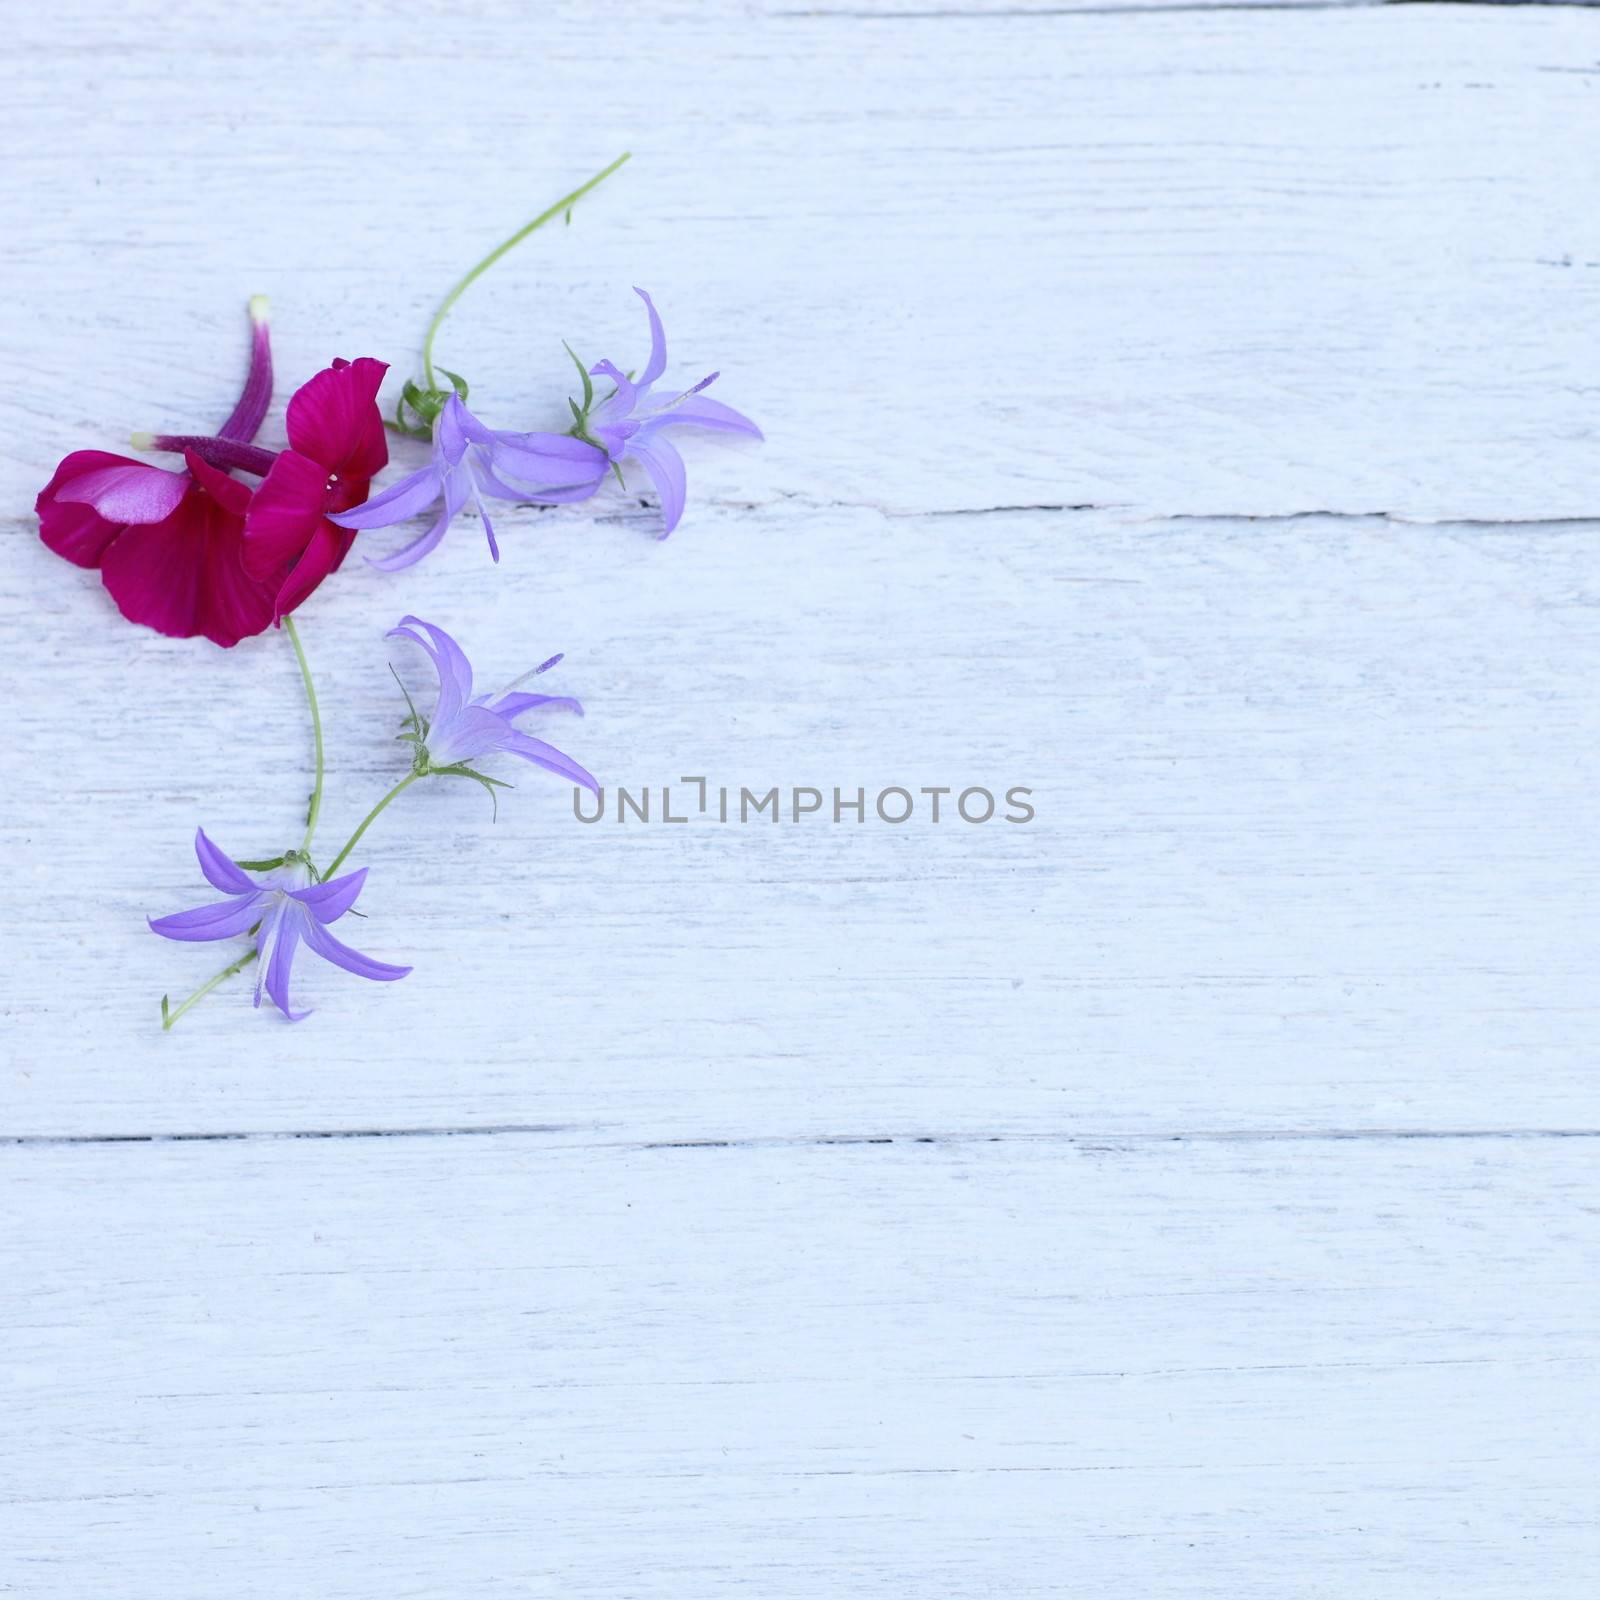 Small arrangement of delicate pretty purple and magenta summer flowers on a painted white wood background with texture and copyspace